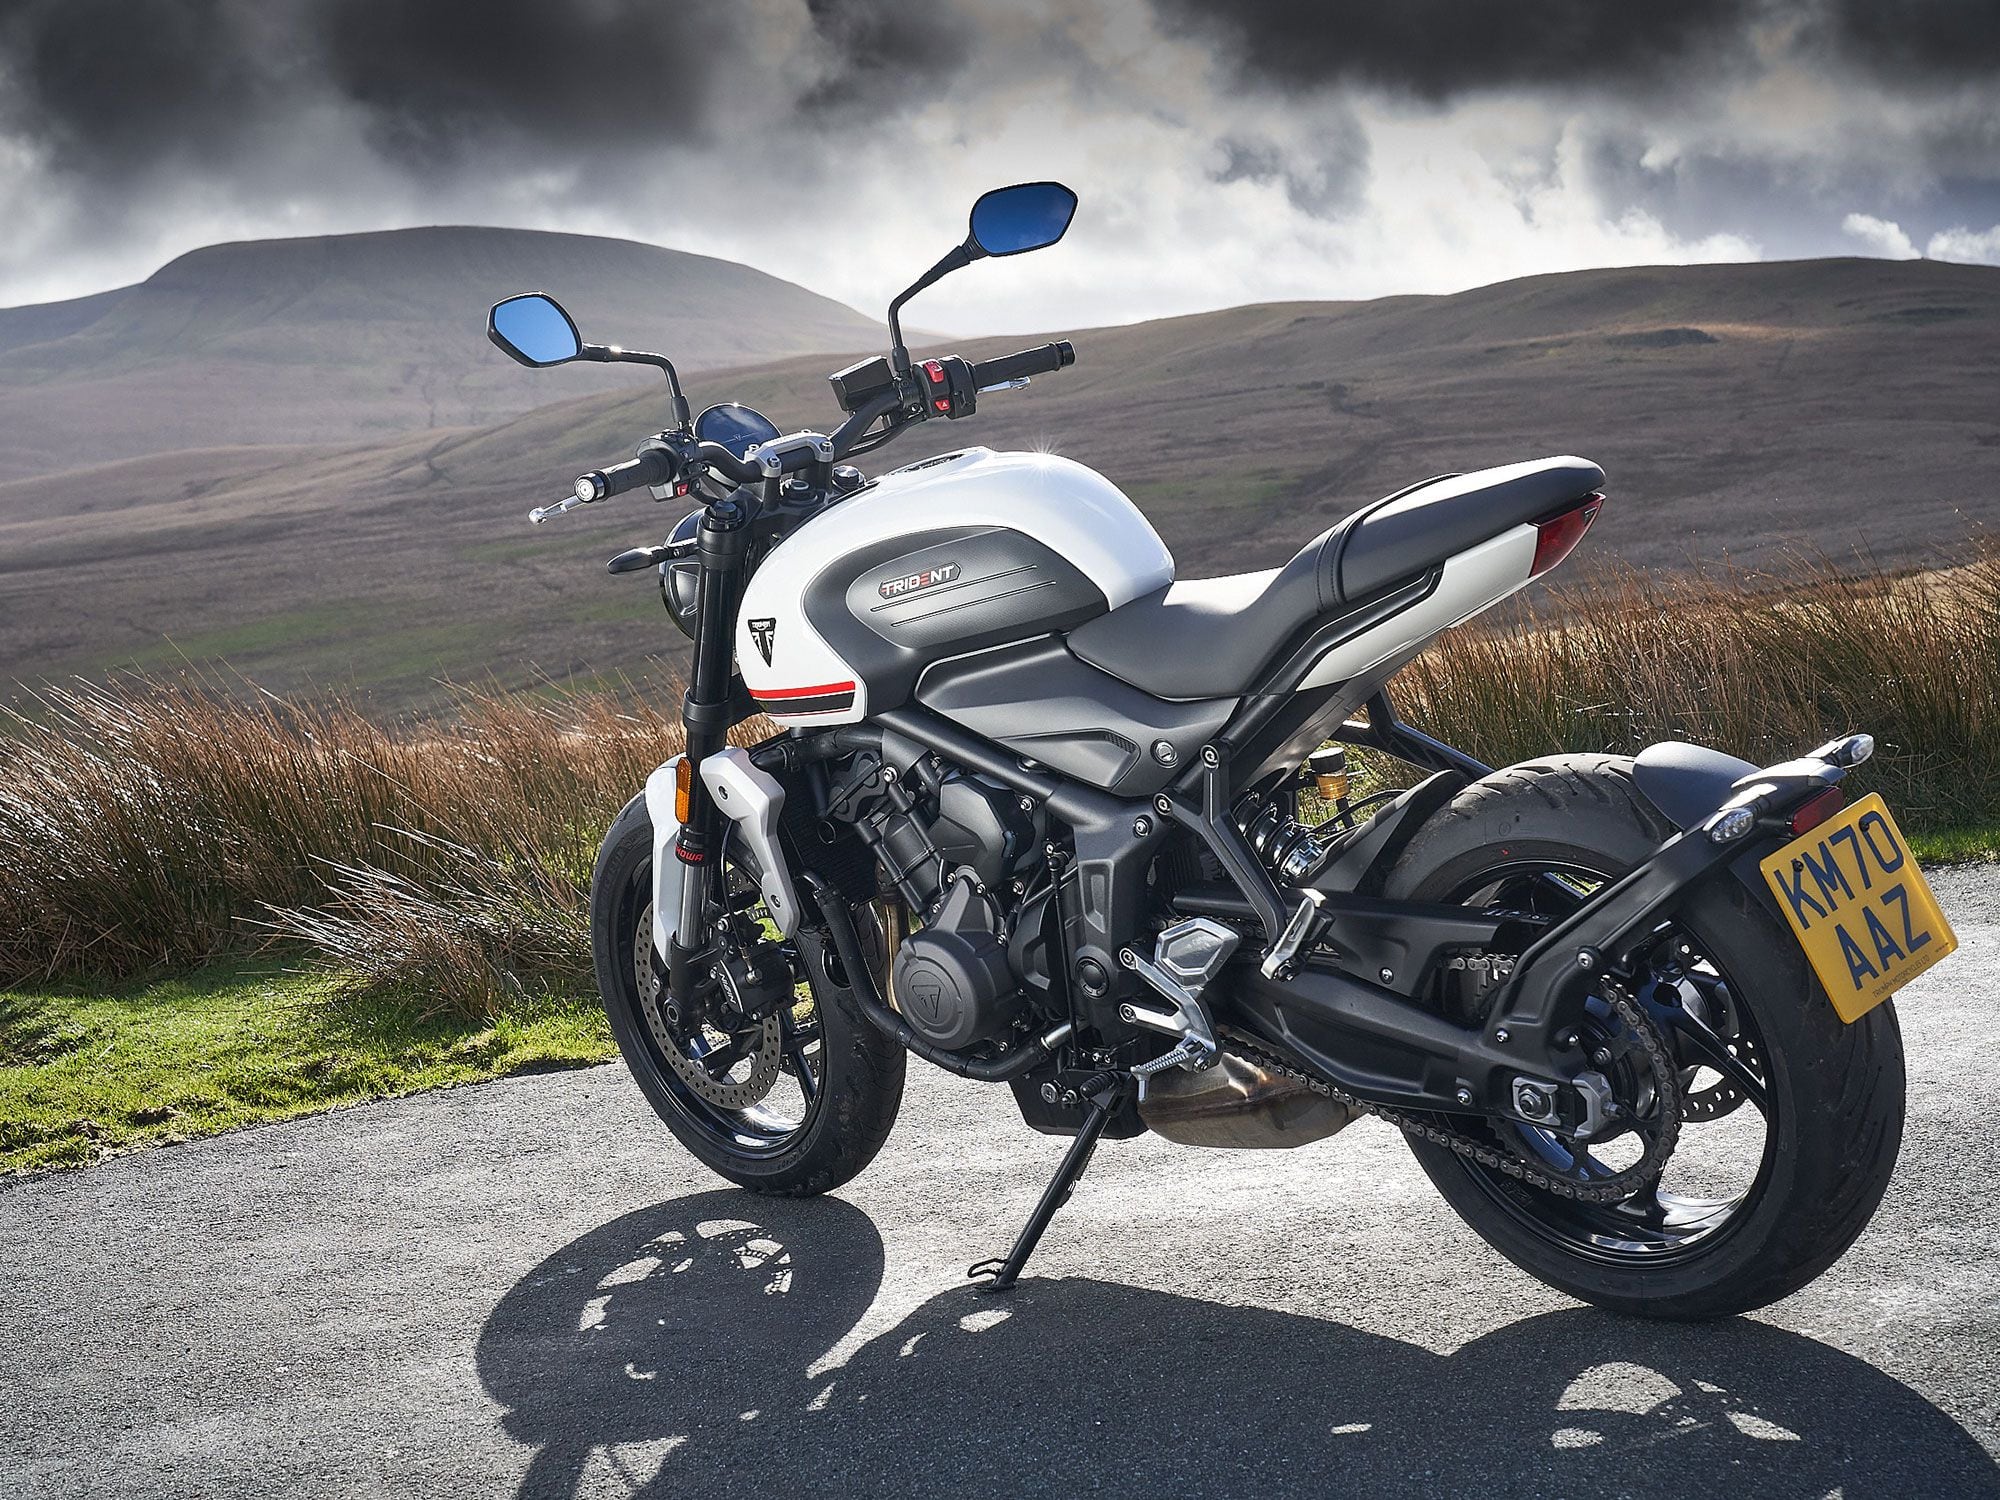 While the fit and finish is not to the same level as other Triumph models, the styling is fresh and unlike other standards or nakeds designed in Hinckley.